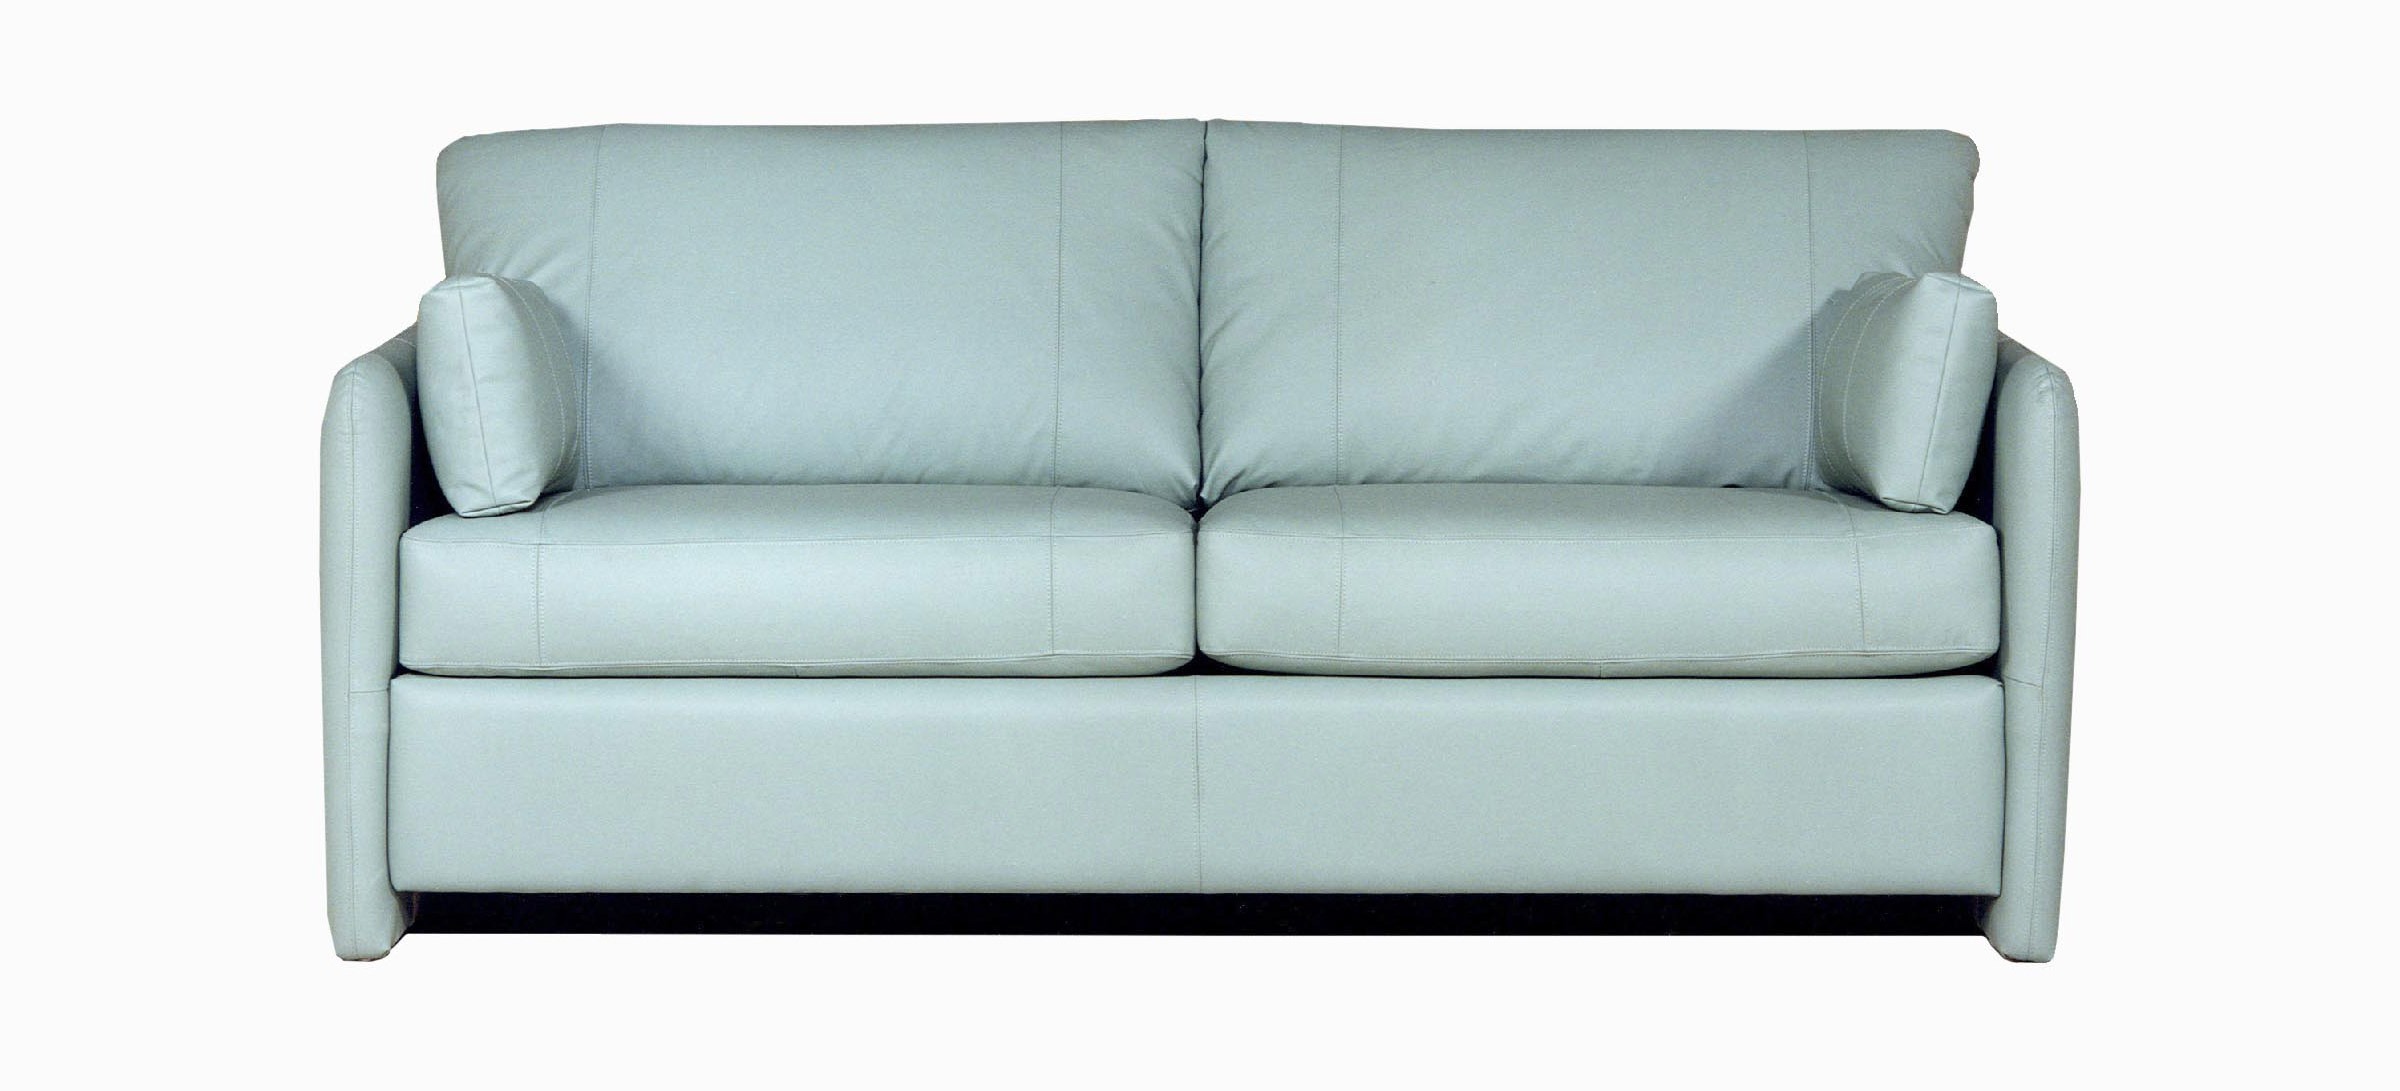 Scarsdale sofa appart